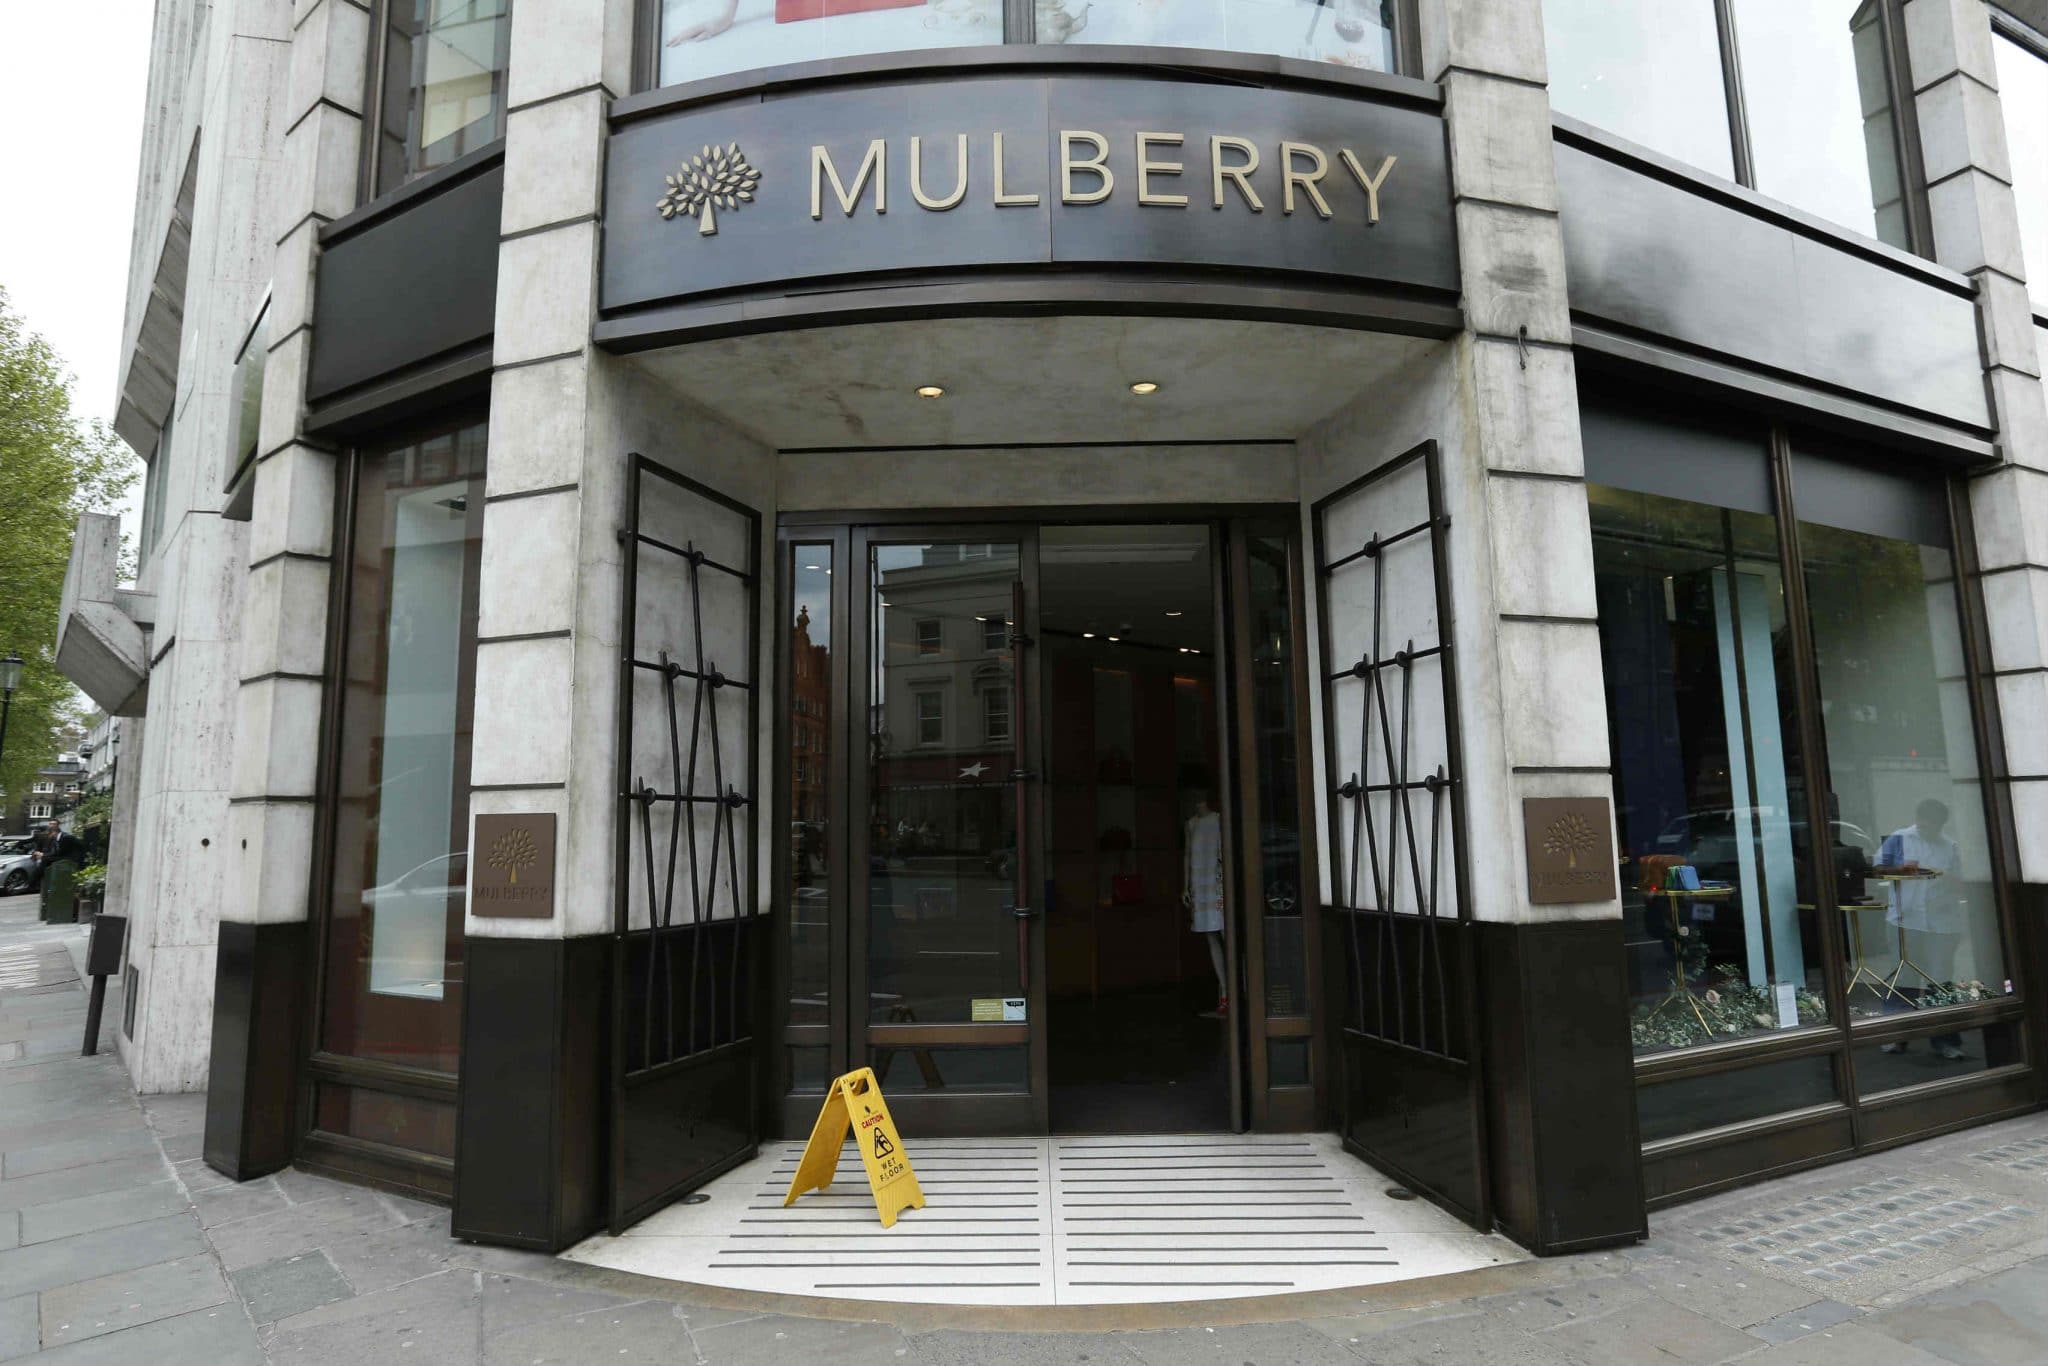 Mulberry half-year losses widen to £9.9m - Retail Gazette